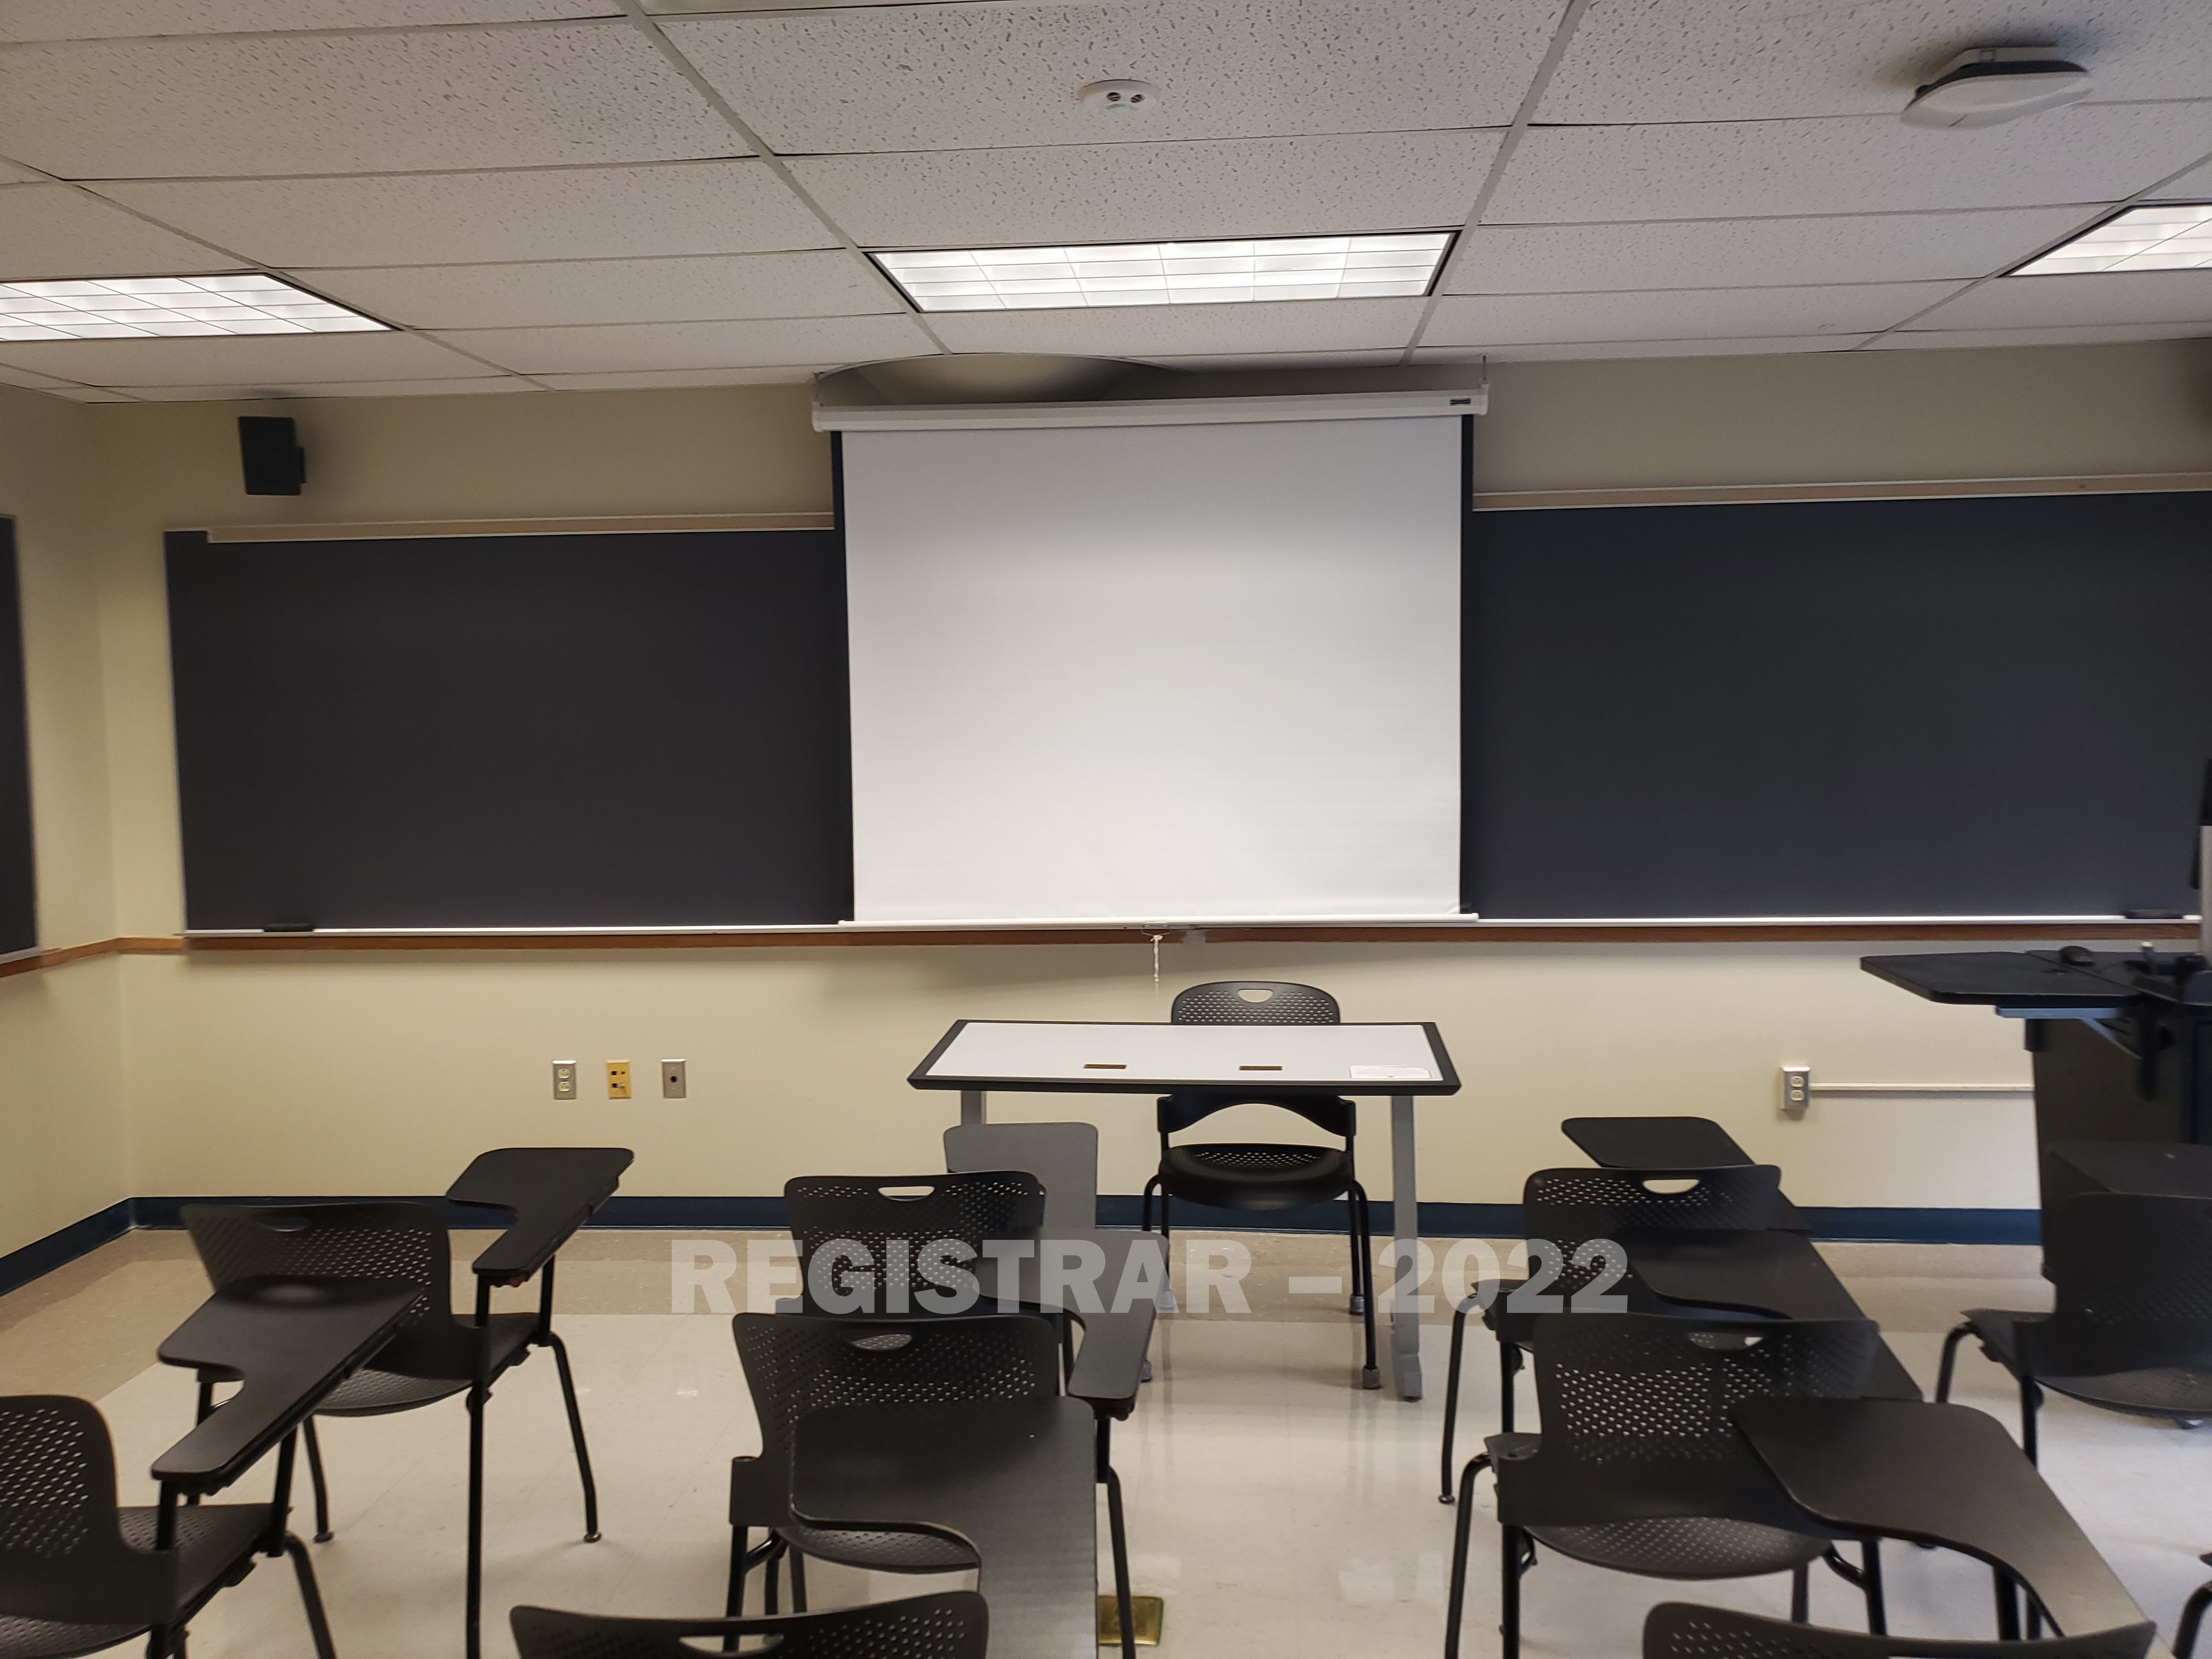 Enarson Classroom Building room 214 view from the back of the room with projector screen down